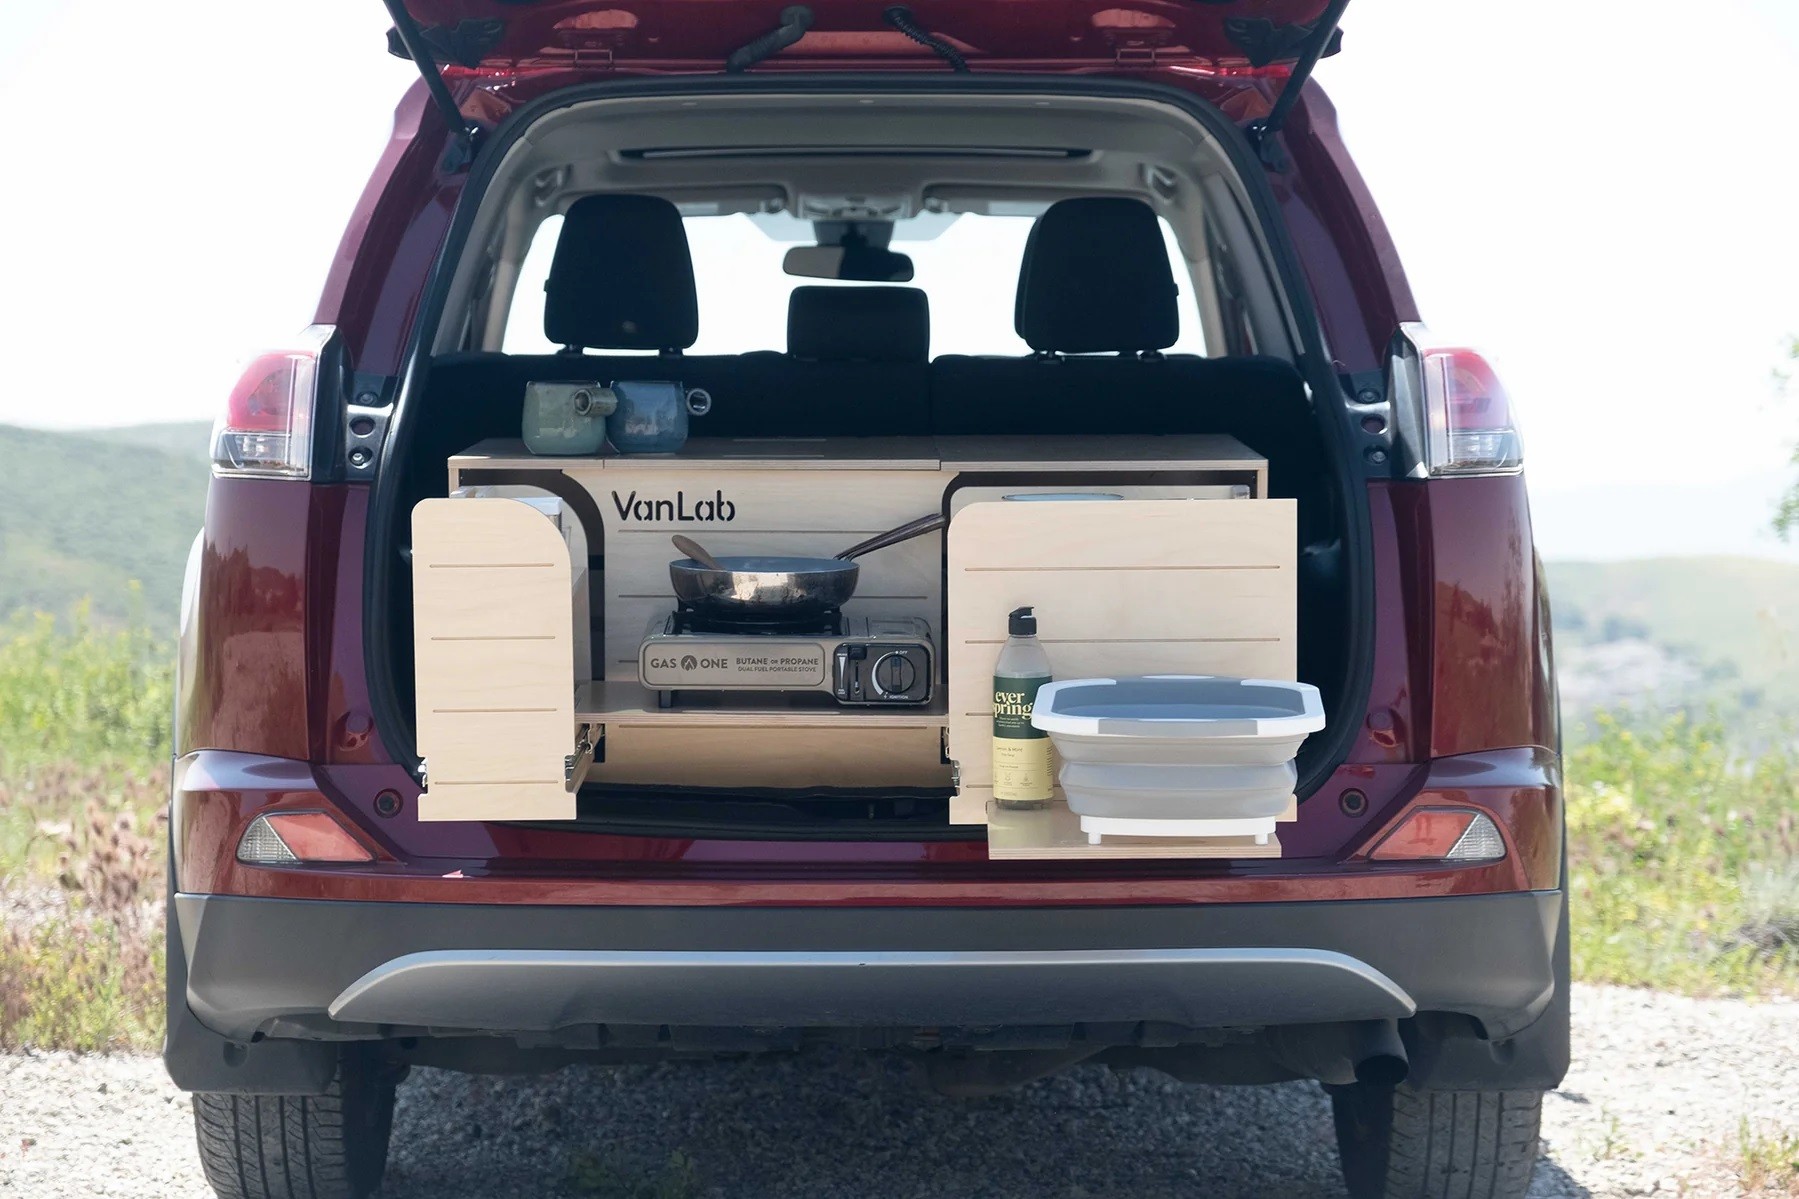 https://s1.cdn.autoevolution.com/images/news/gallery/turn-your-suv-into-a-micro-camper-with-vanlab-s-ikea-like-conversion-kit_4.jpg